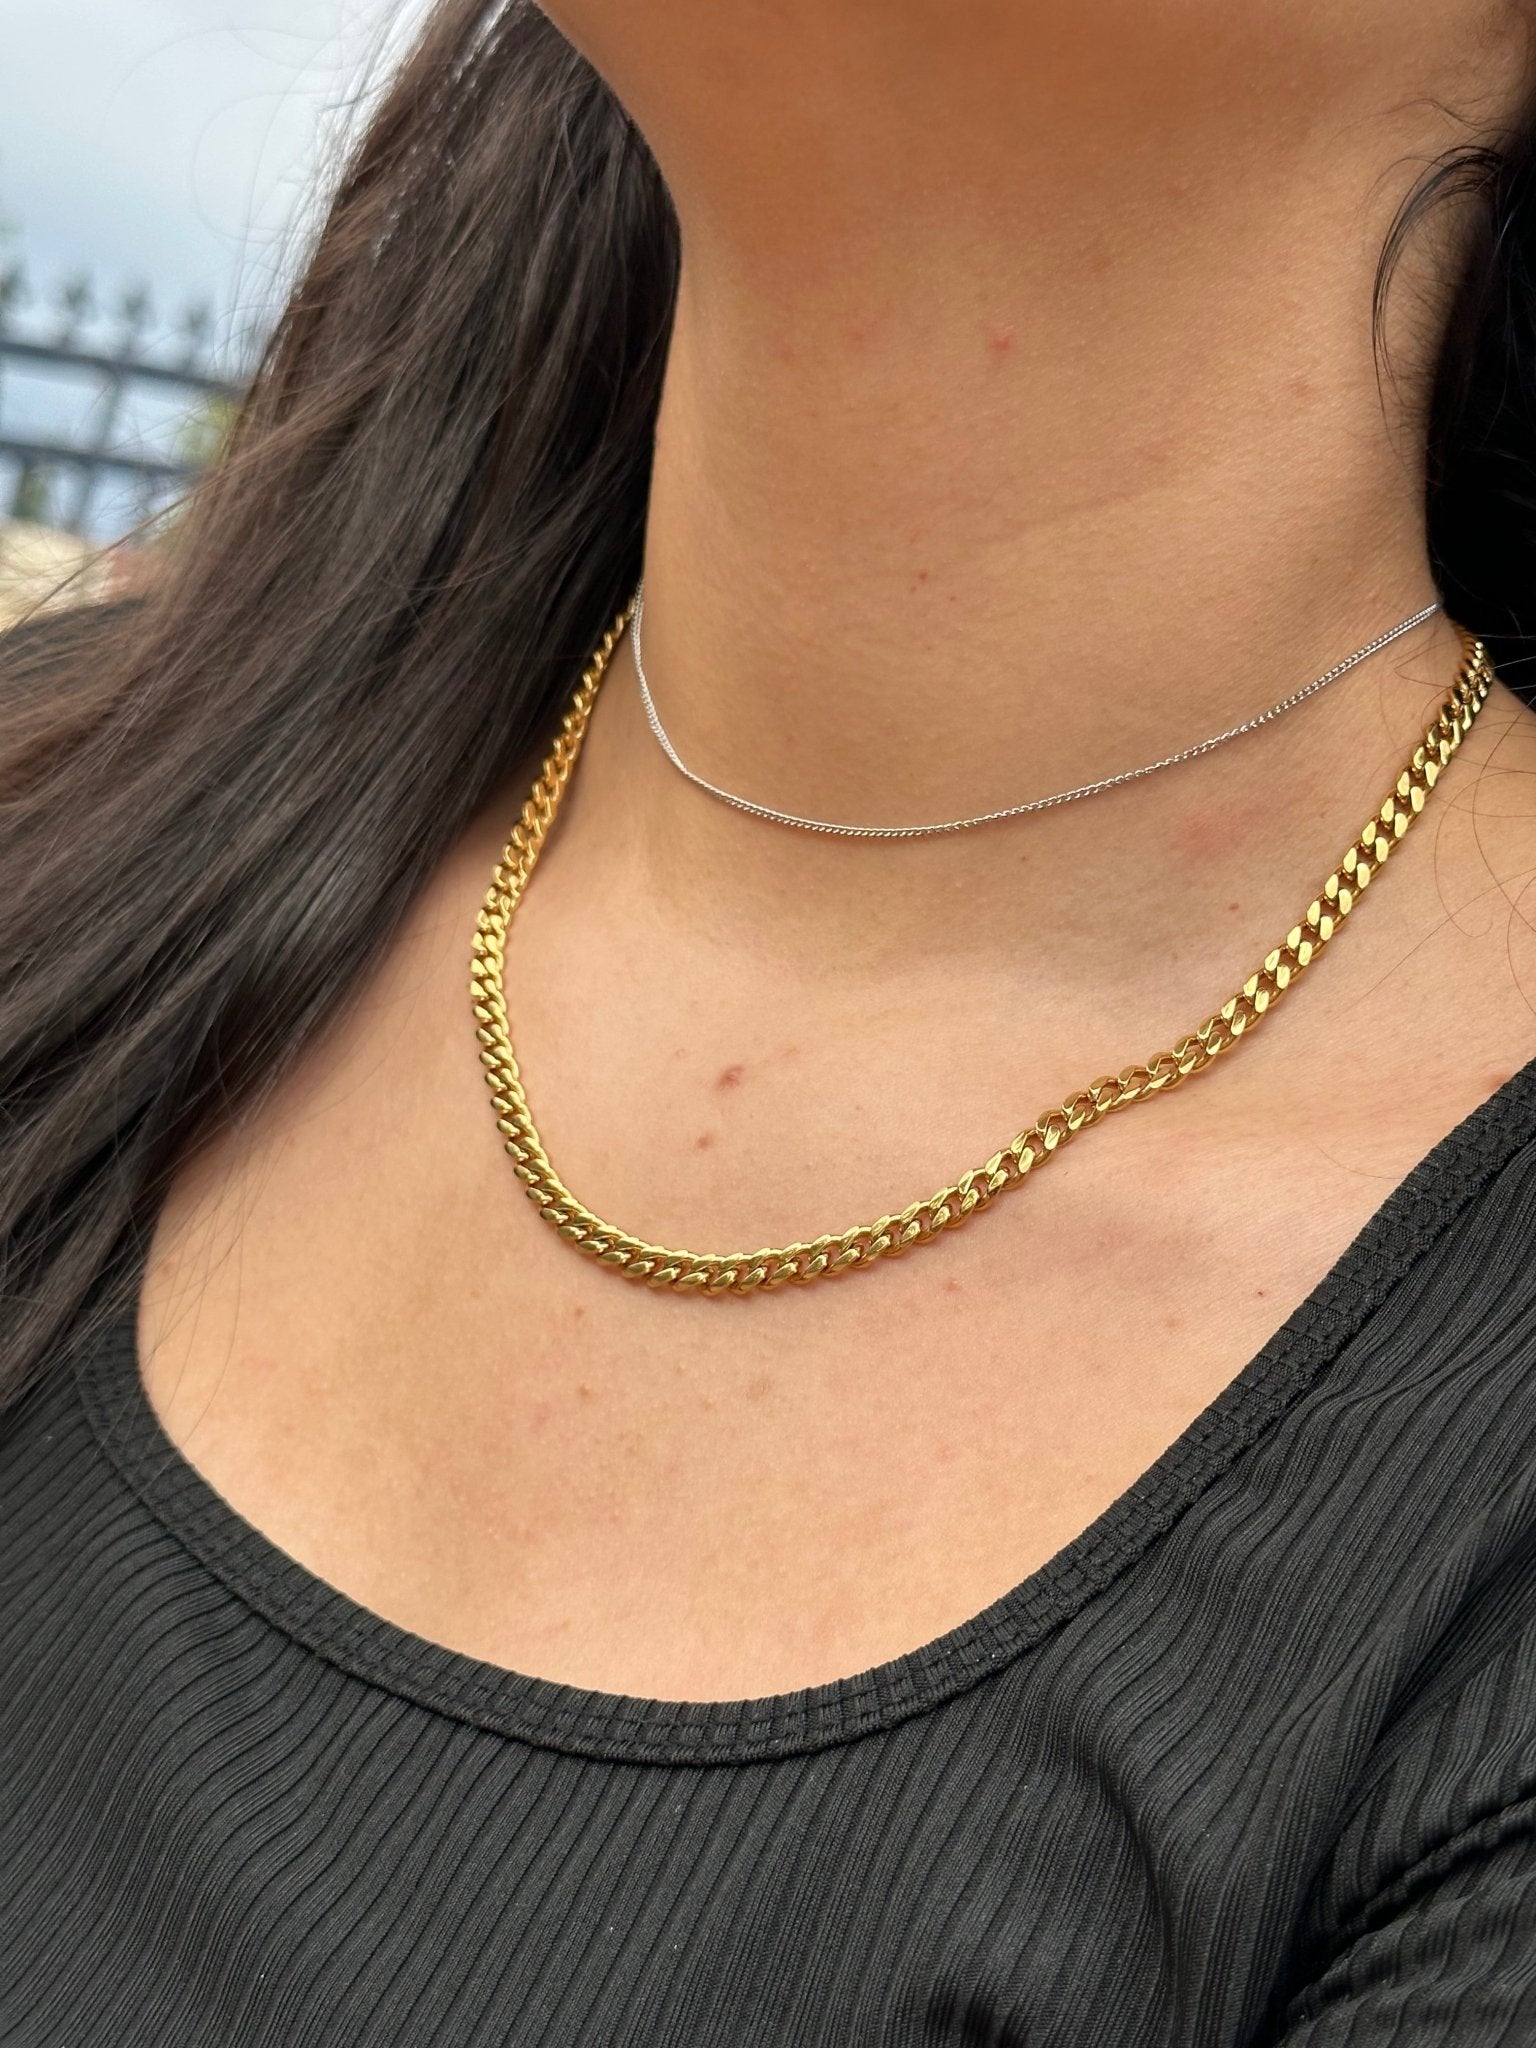 Women's Chain Necklace Silver / Gold